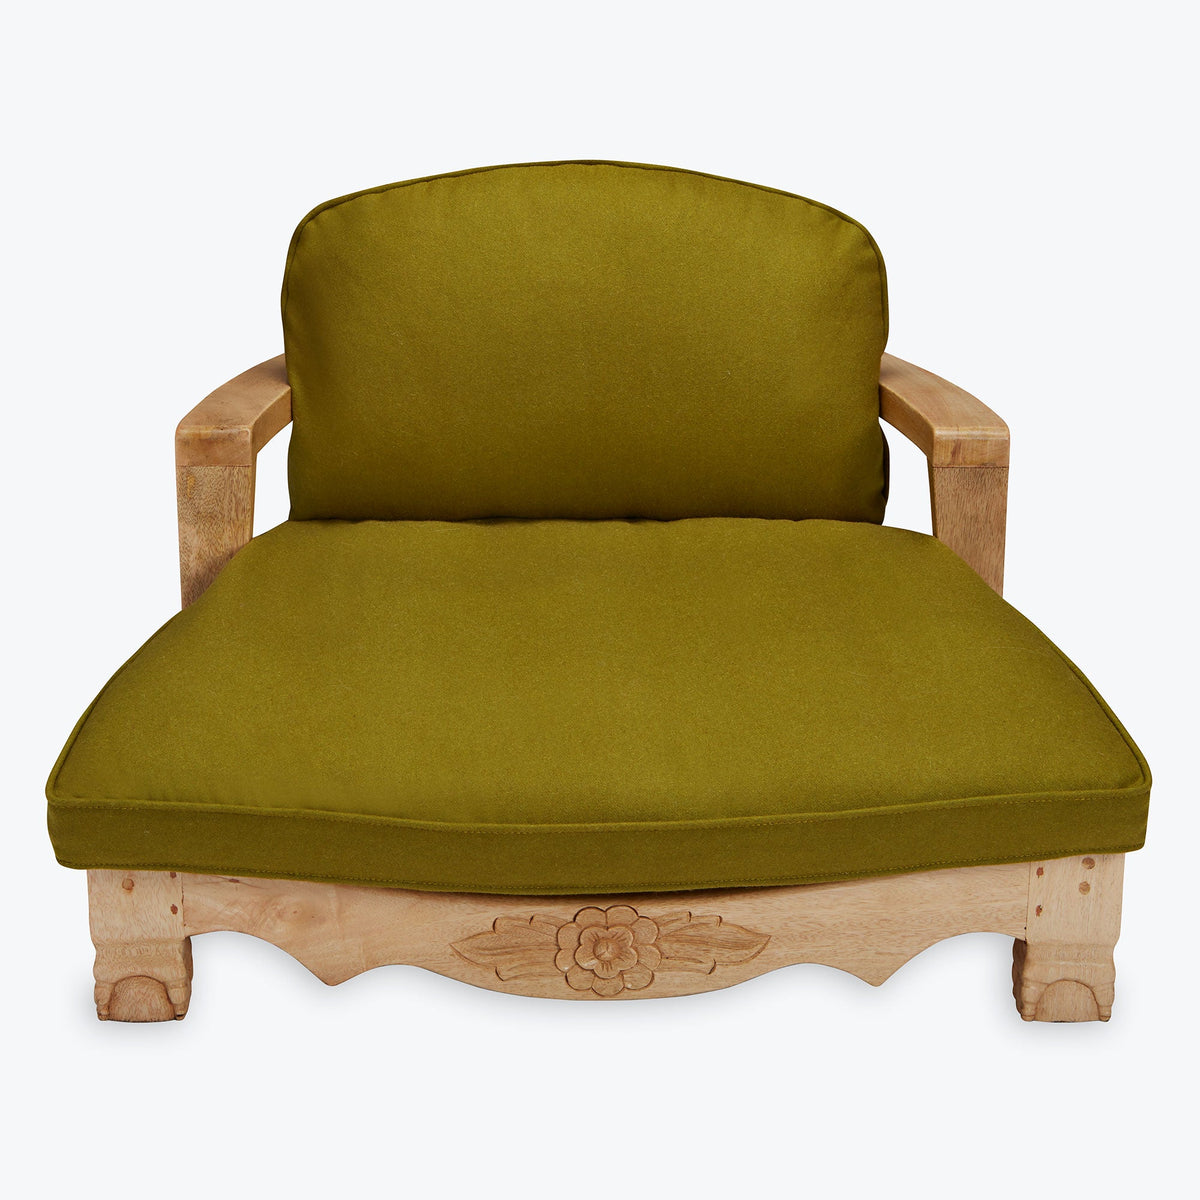 Light raja chair with moss cover